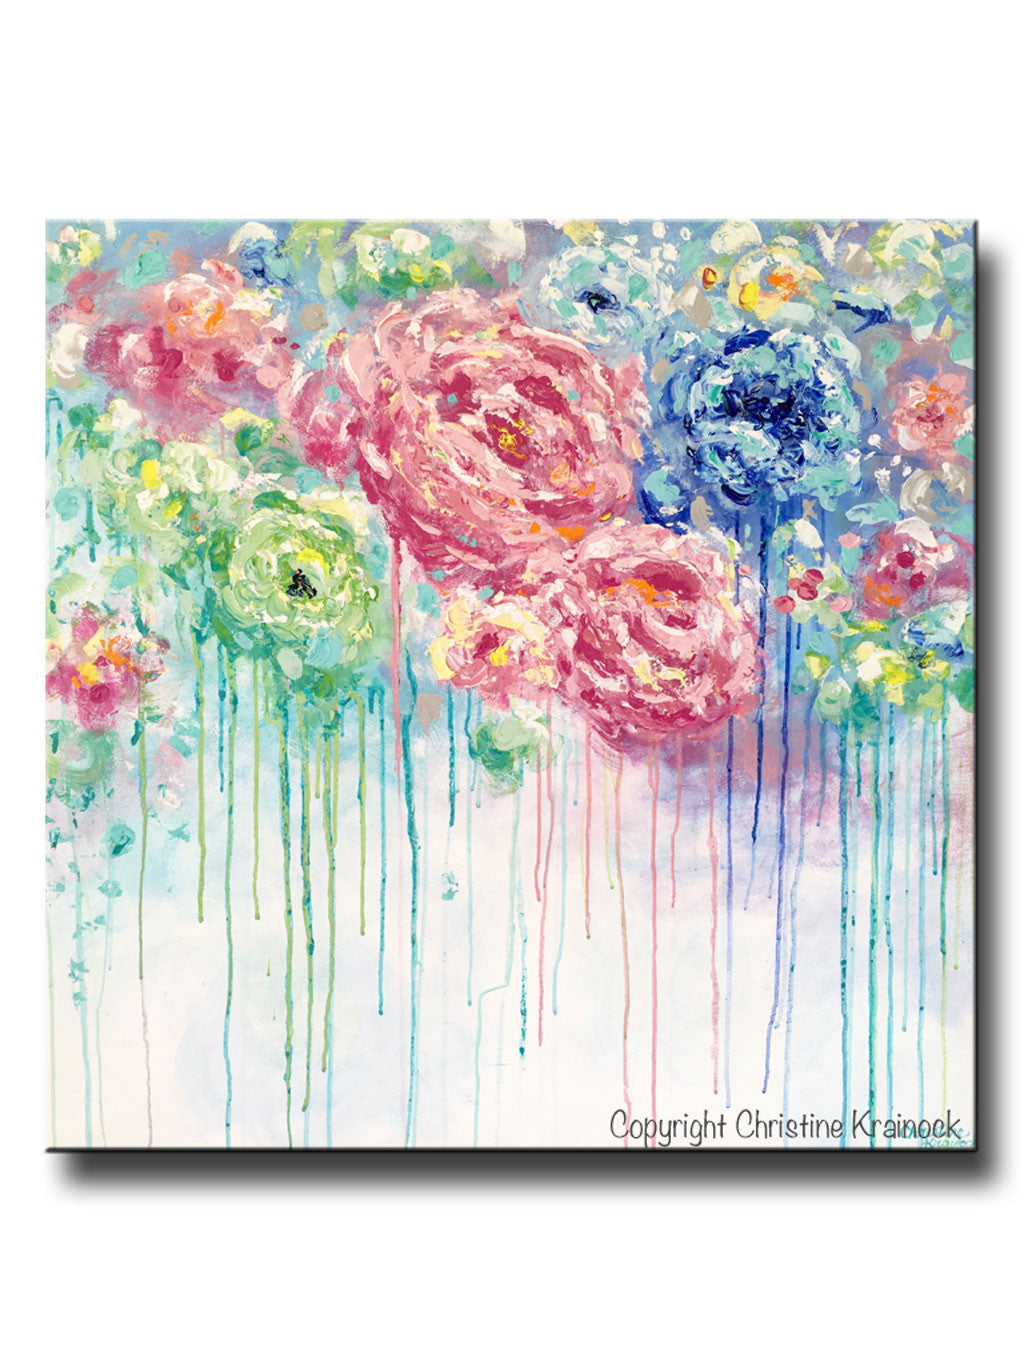 ORIGINAL Art Abstract Painting Flowers Blue White Pink Floral Textured XL Wall Art Colorful Peonies - Christine Krainock Art - Contemporary Art by Christine - 1